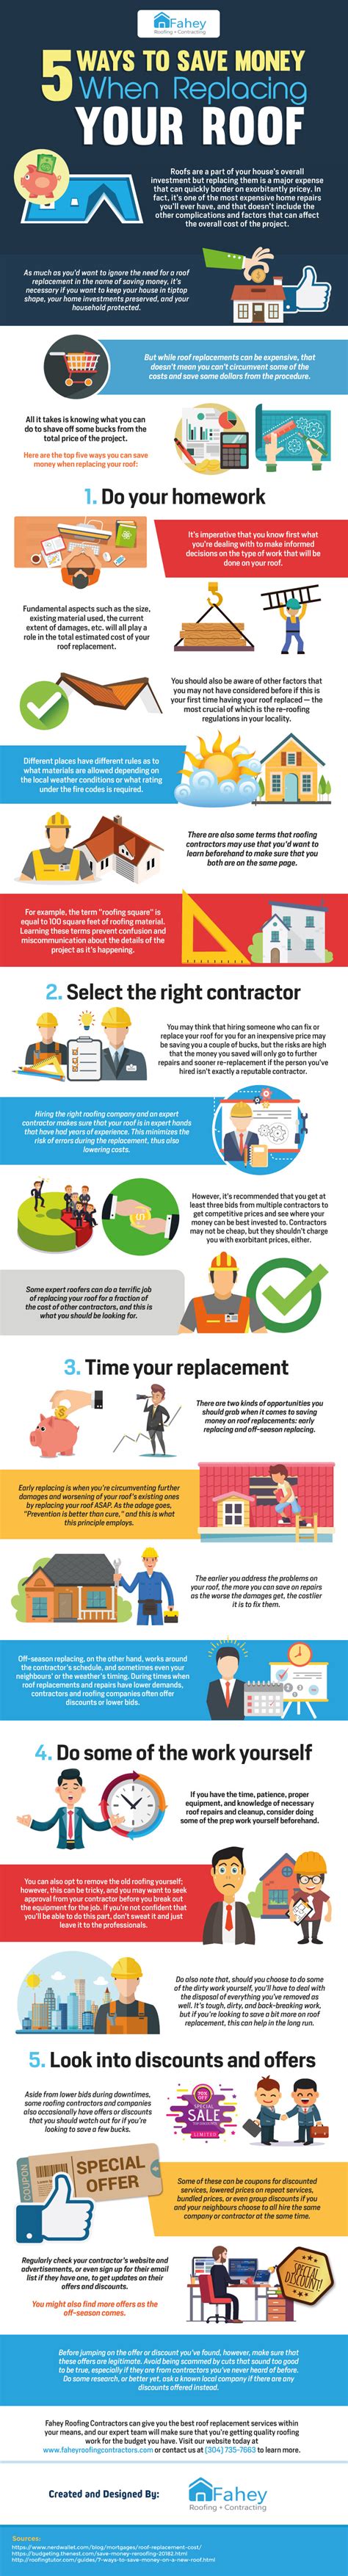 5 Ways To Save Money When Replacing Your Roof Infographic